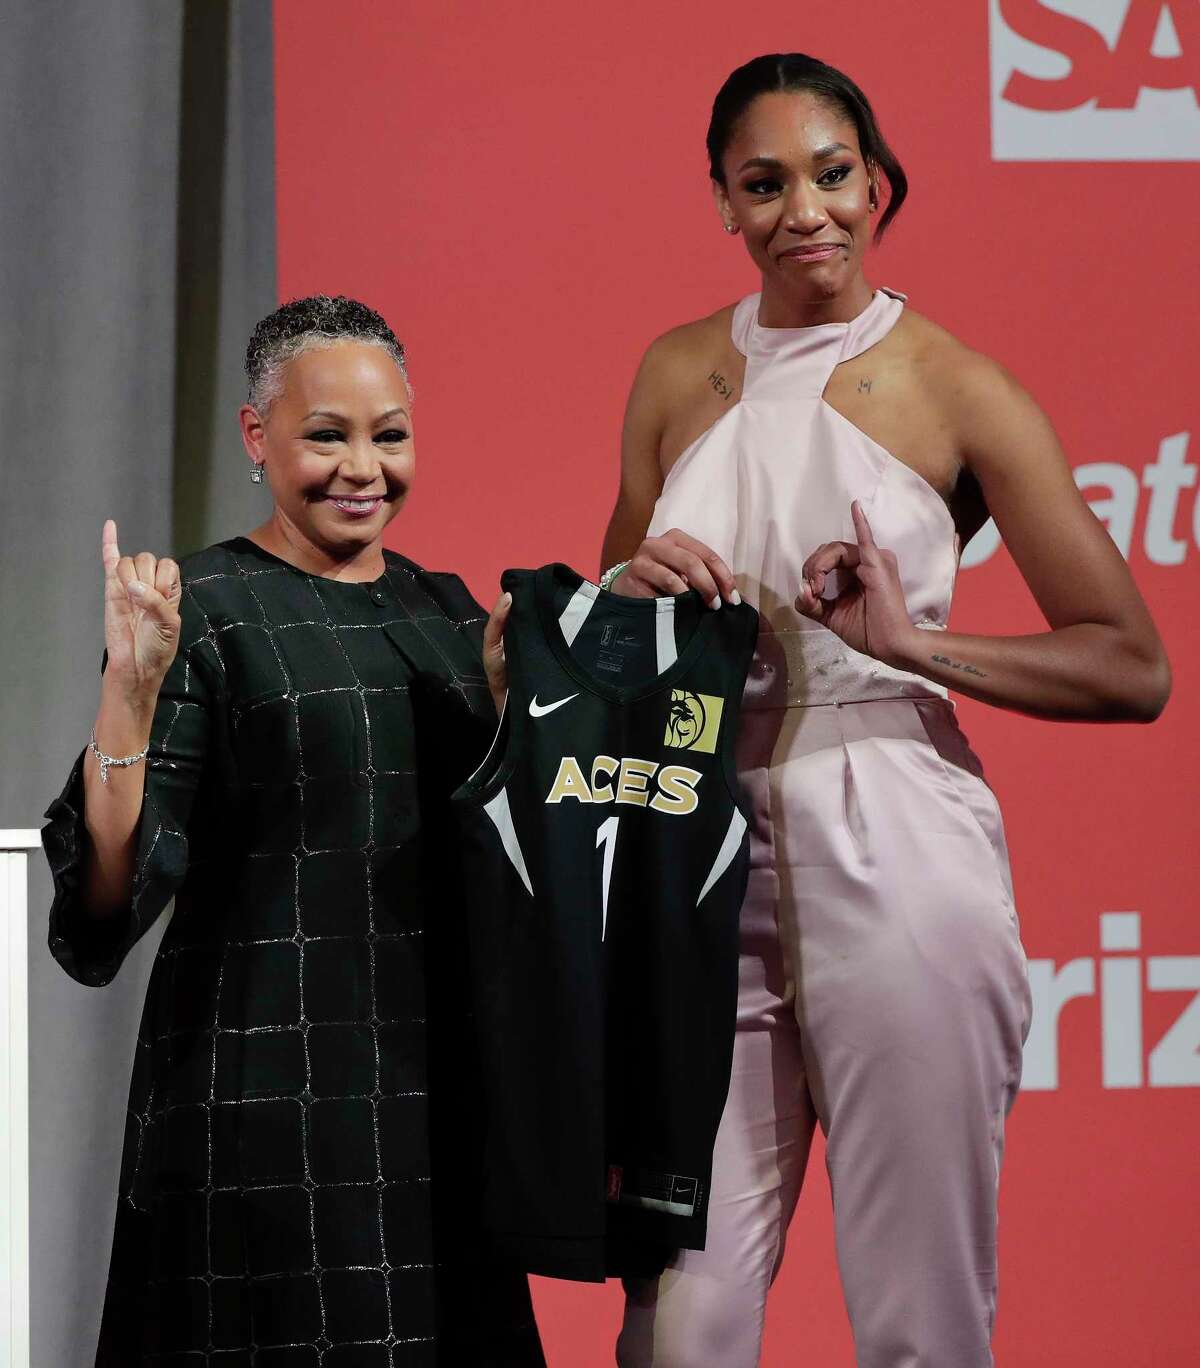 South Carolina's A'ja Wilson, right, poses for a photo with WNBA President Lisa Borders after being selected as the No. 1 overall pick by the Las Vegas Aces in the WNBA basketball draft, Thursday, April 12, 2018, in New York. (AP Photo/Julie Jacobson)